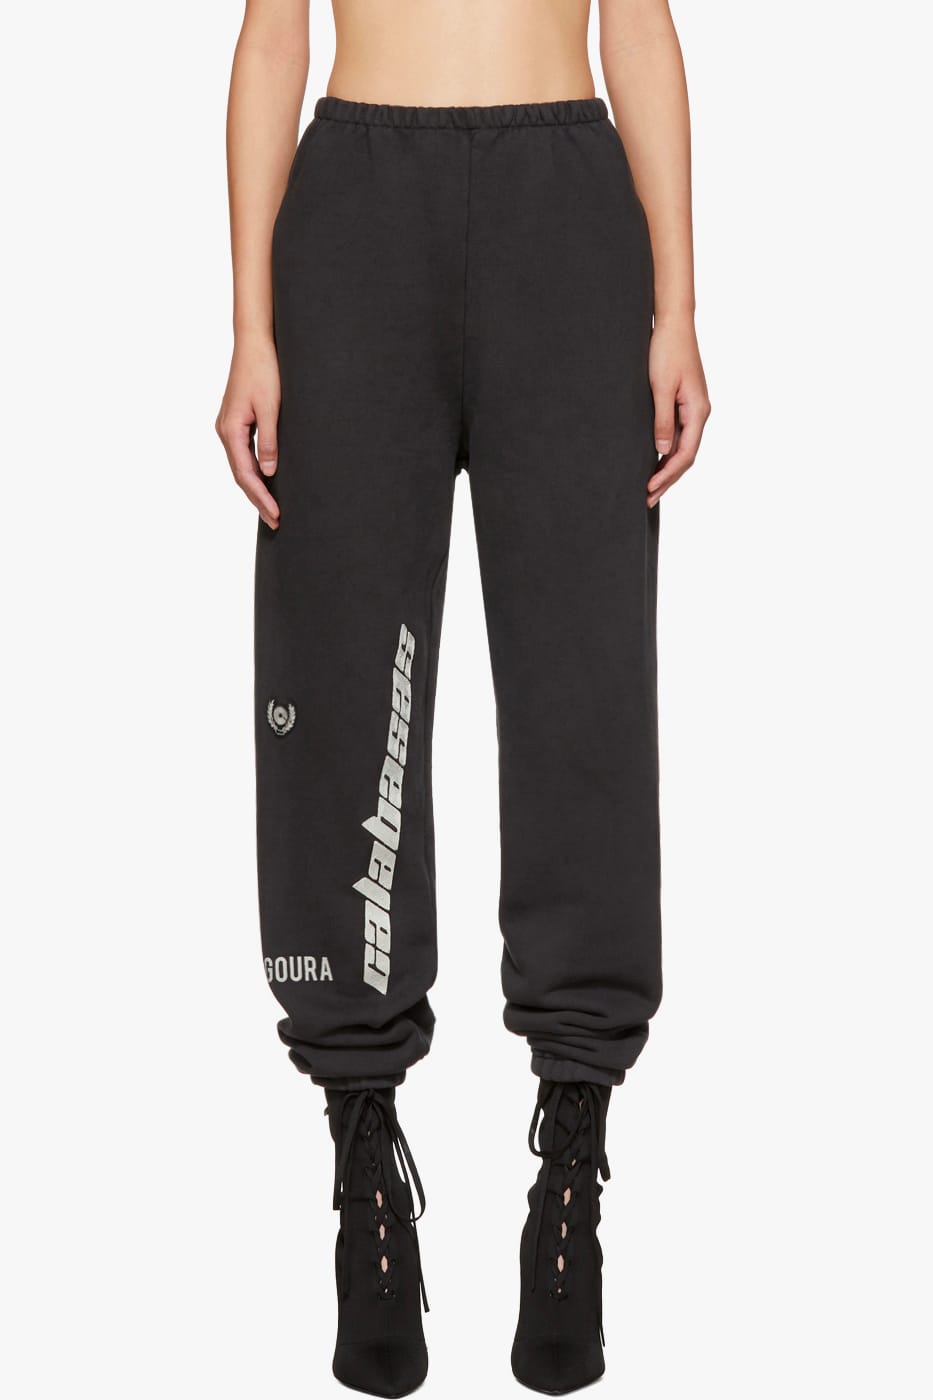 yeezy calabasas french terry pant